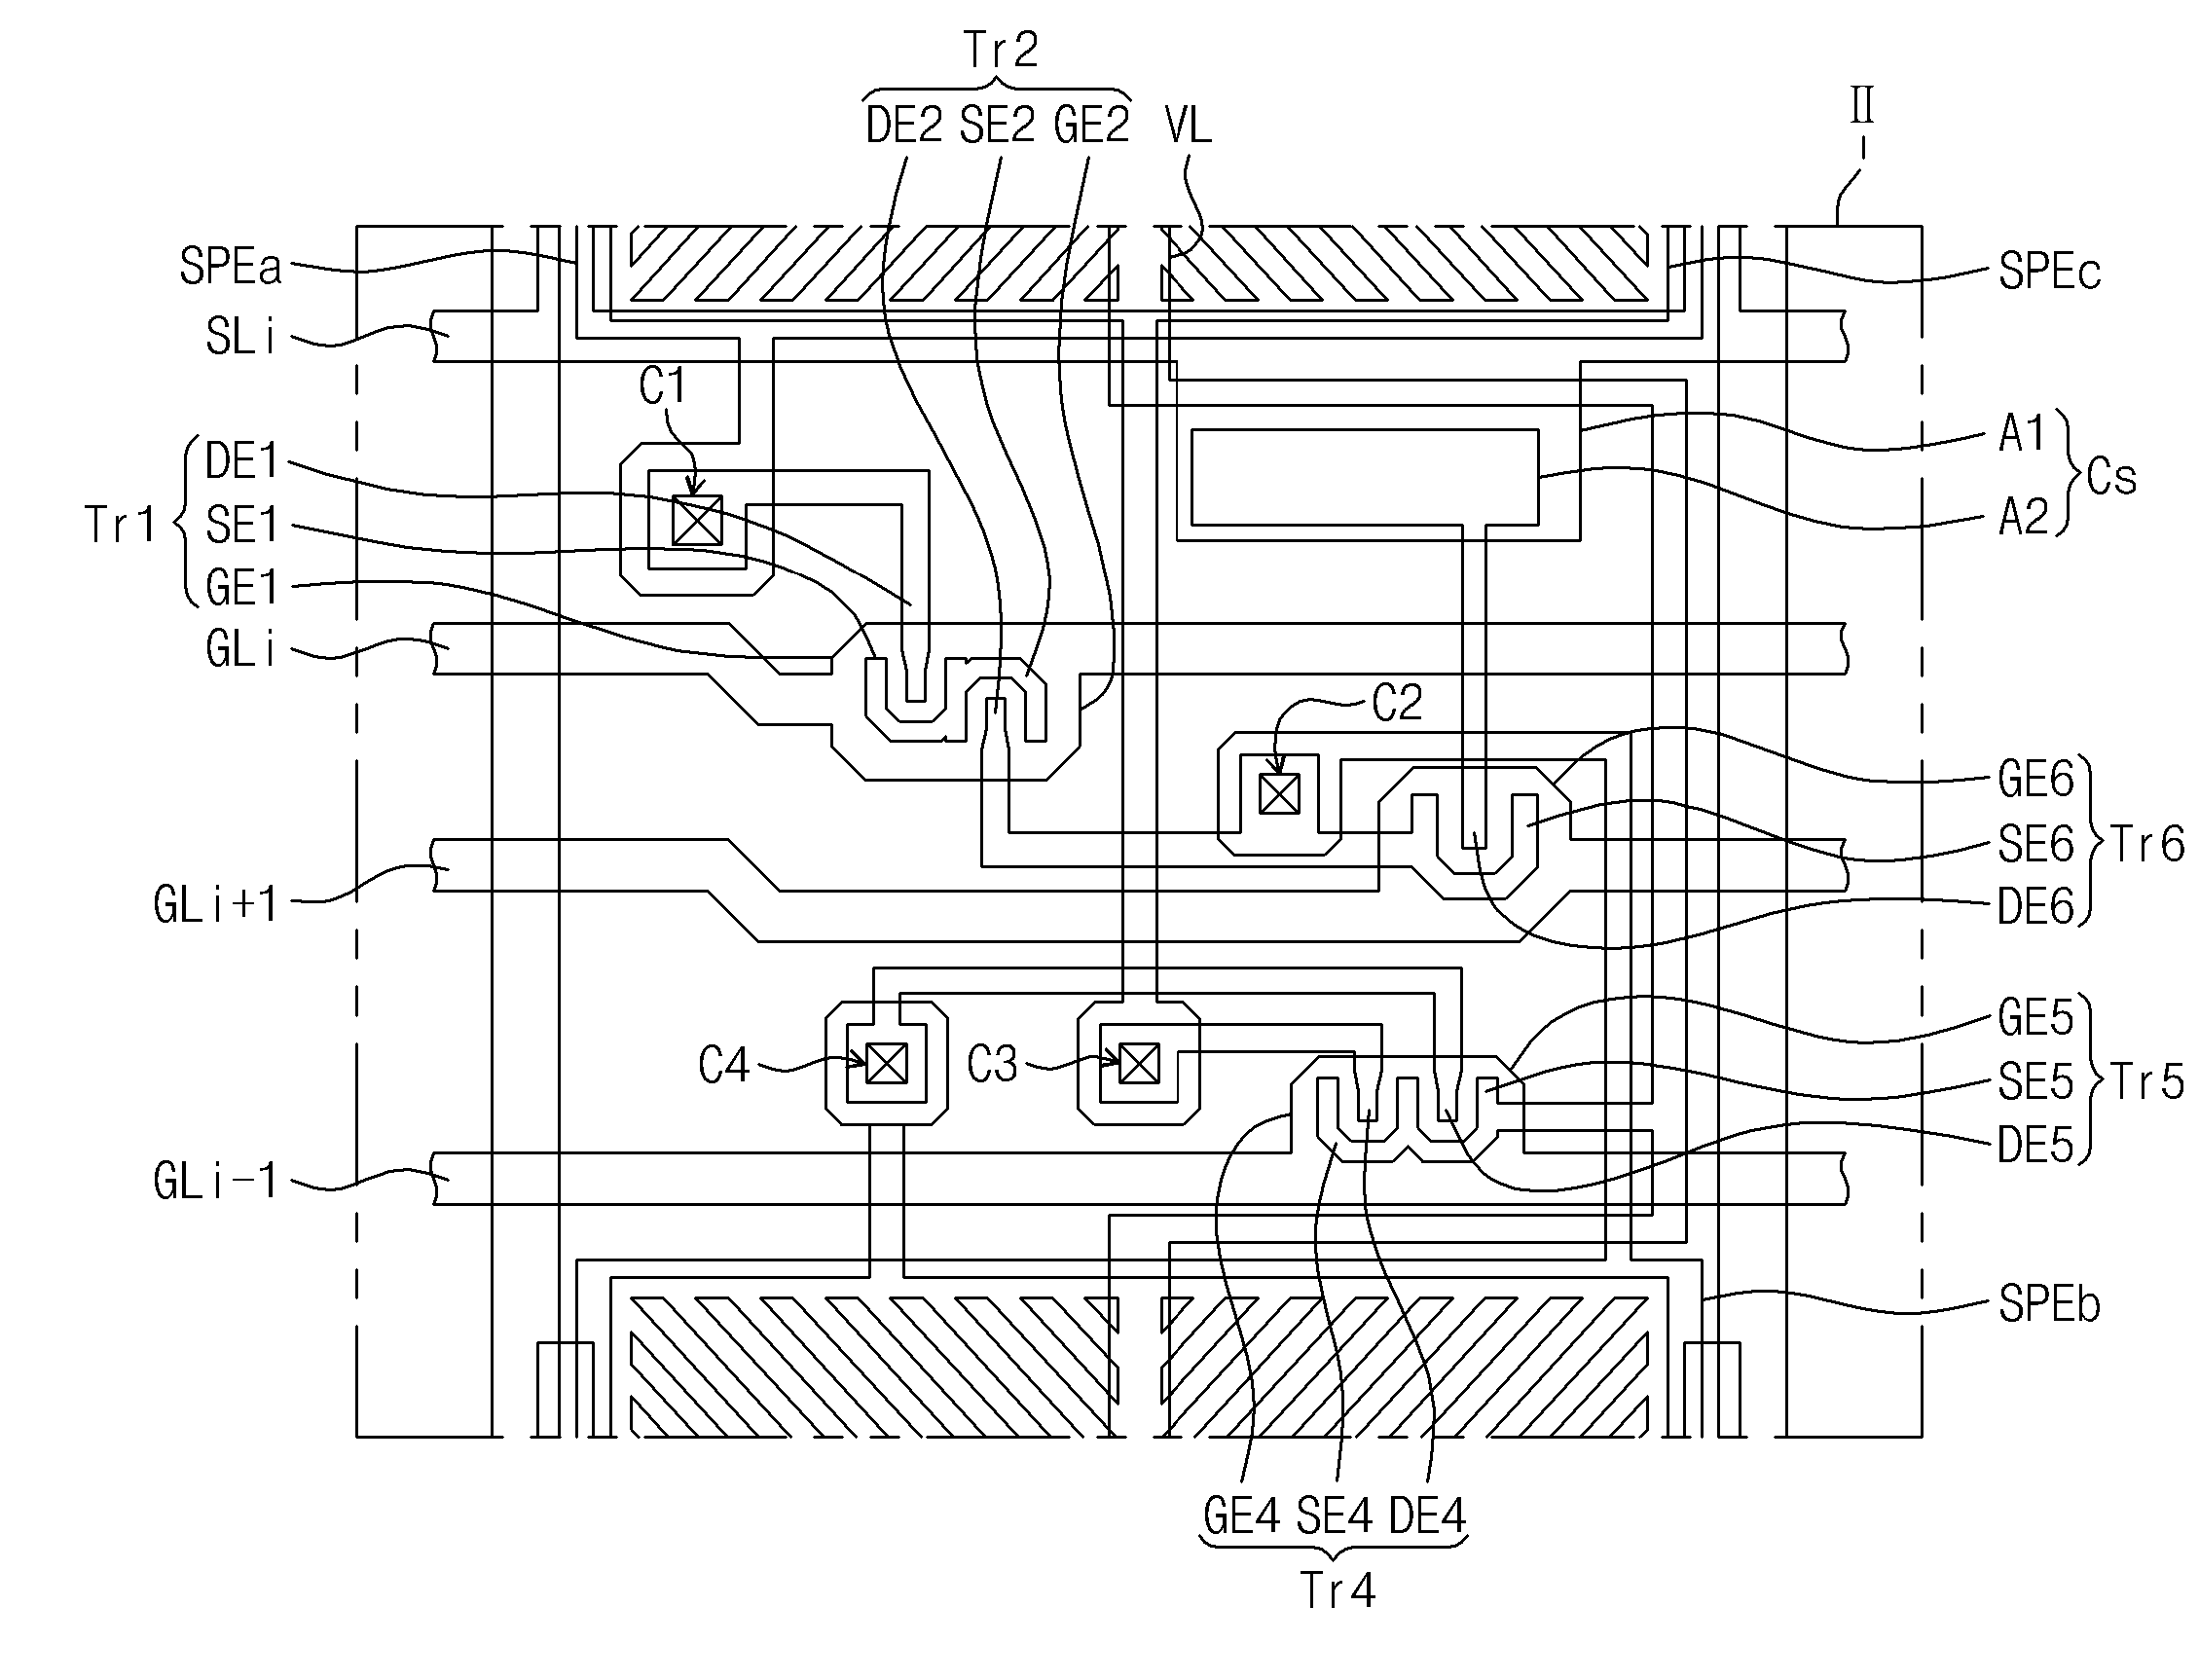 Display apparatus, method of manufacturing the same, and method of driving the same